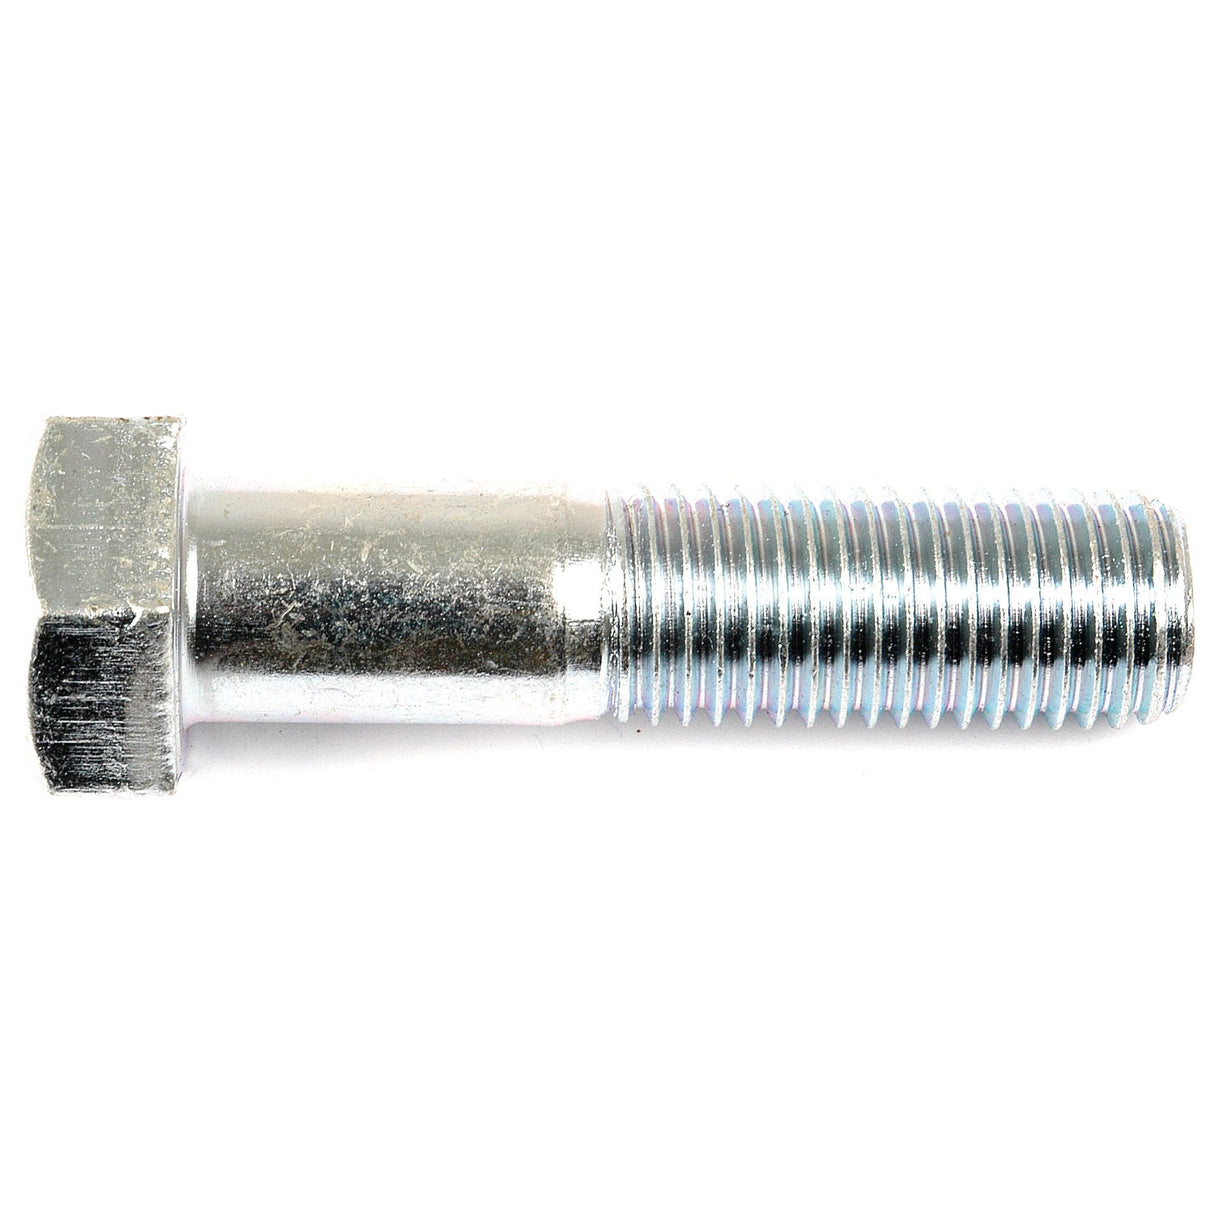 Metric Bolt, Size: M20 x 80mm (Din 931)
 - S.8206 - Massey Tractor Parts